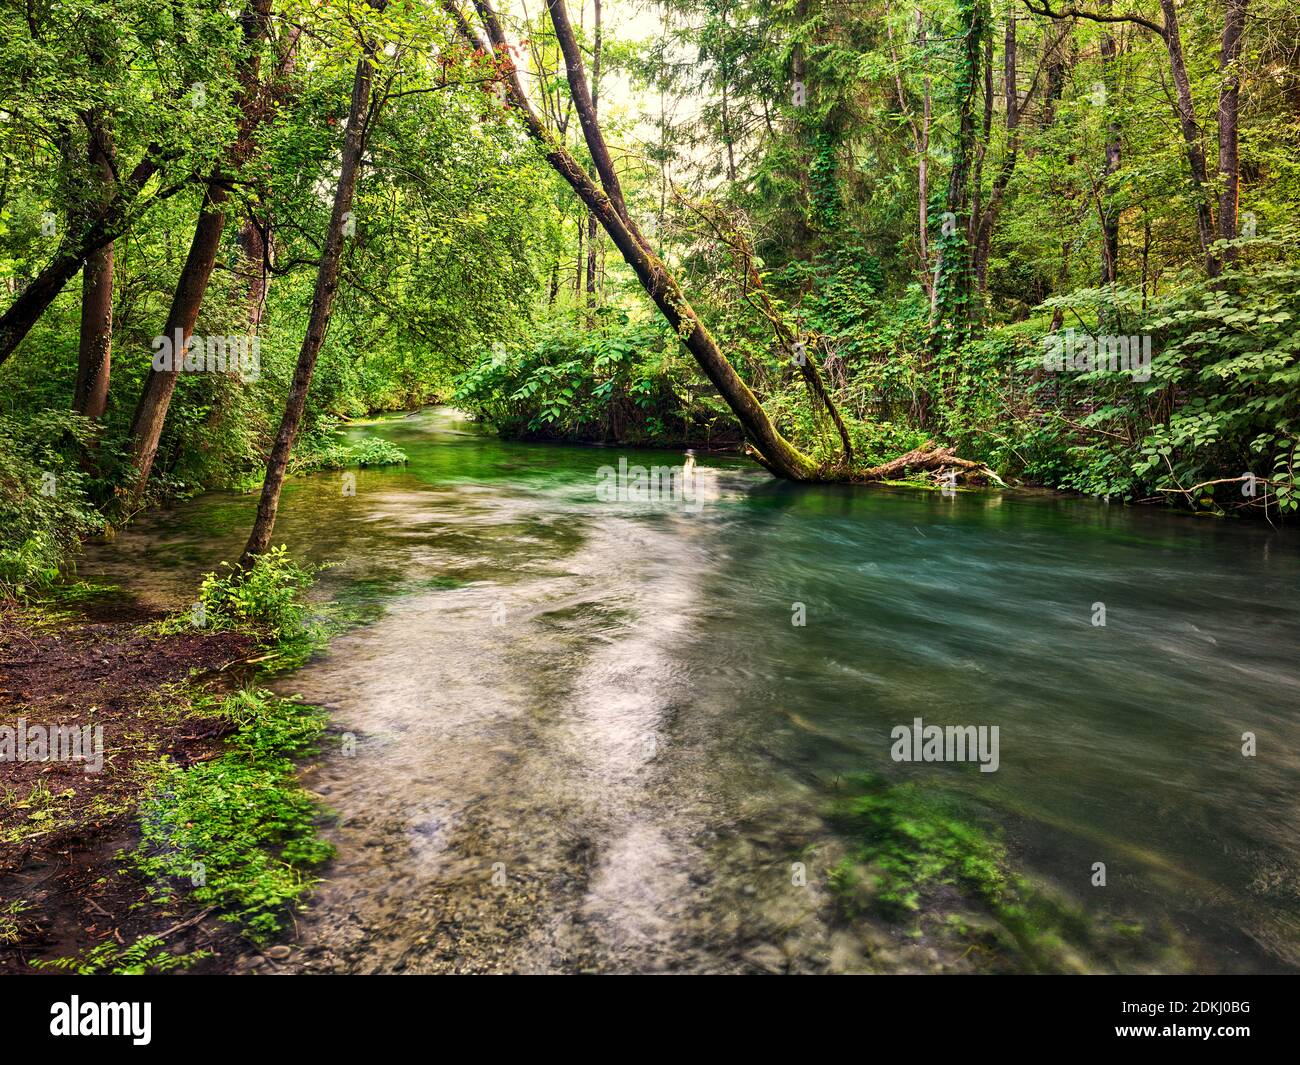 Floodplain, floodplain, alluvial forest, forest, river, flowing water, Ache, river bank, bank, thicket, impenetrable Stock Photo